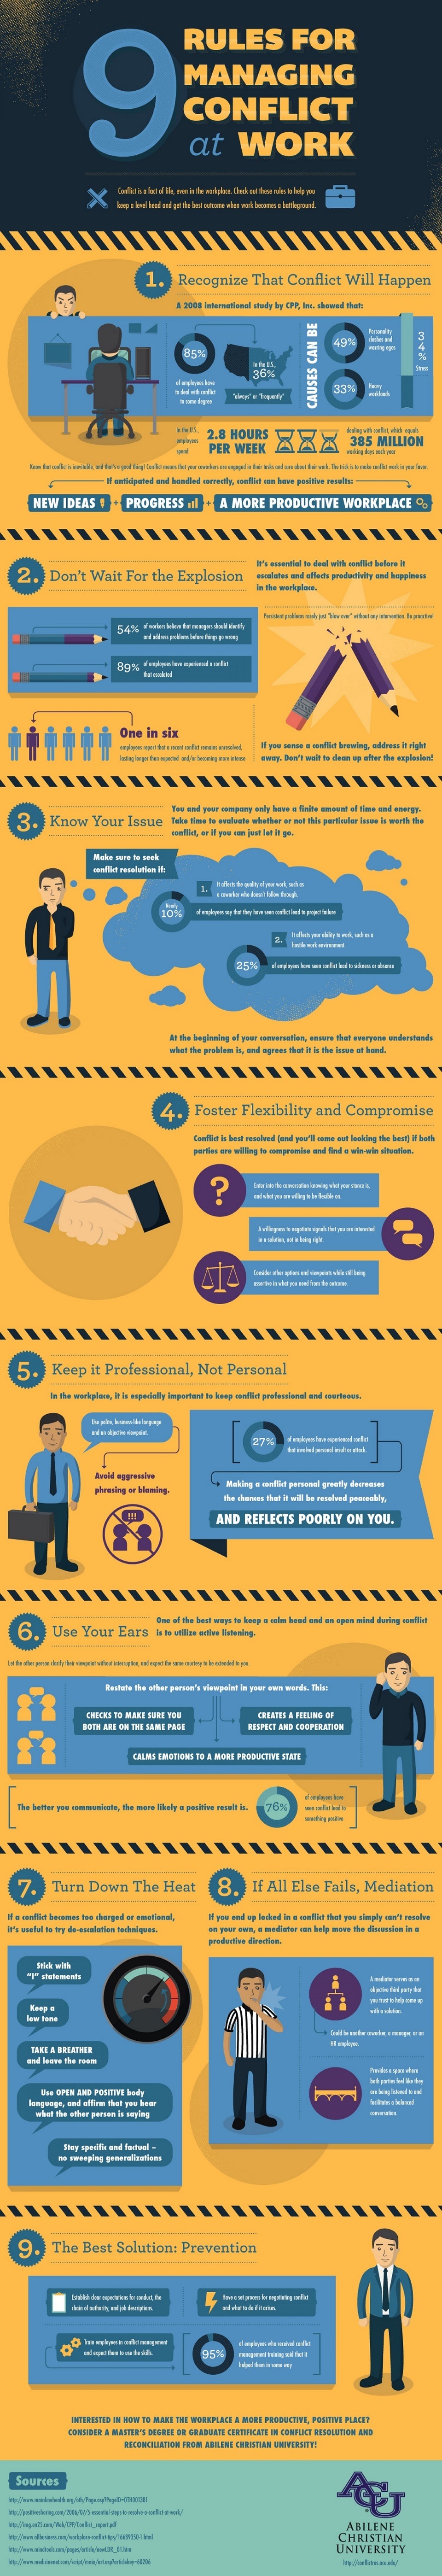 How to Manage Conflict at Work Infographic